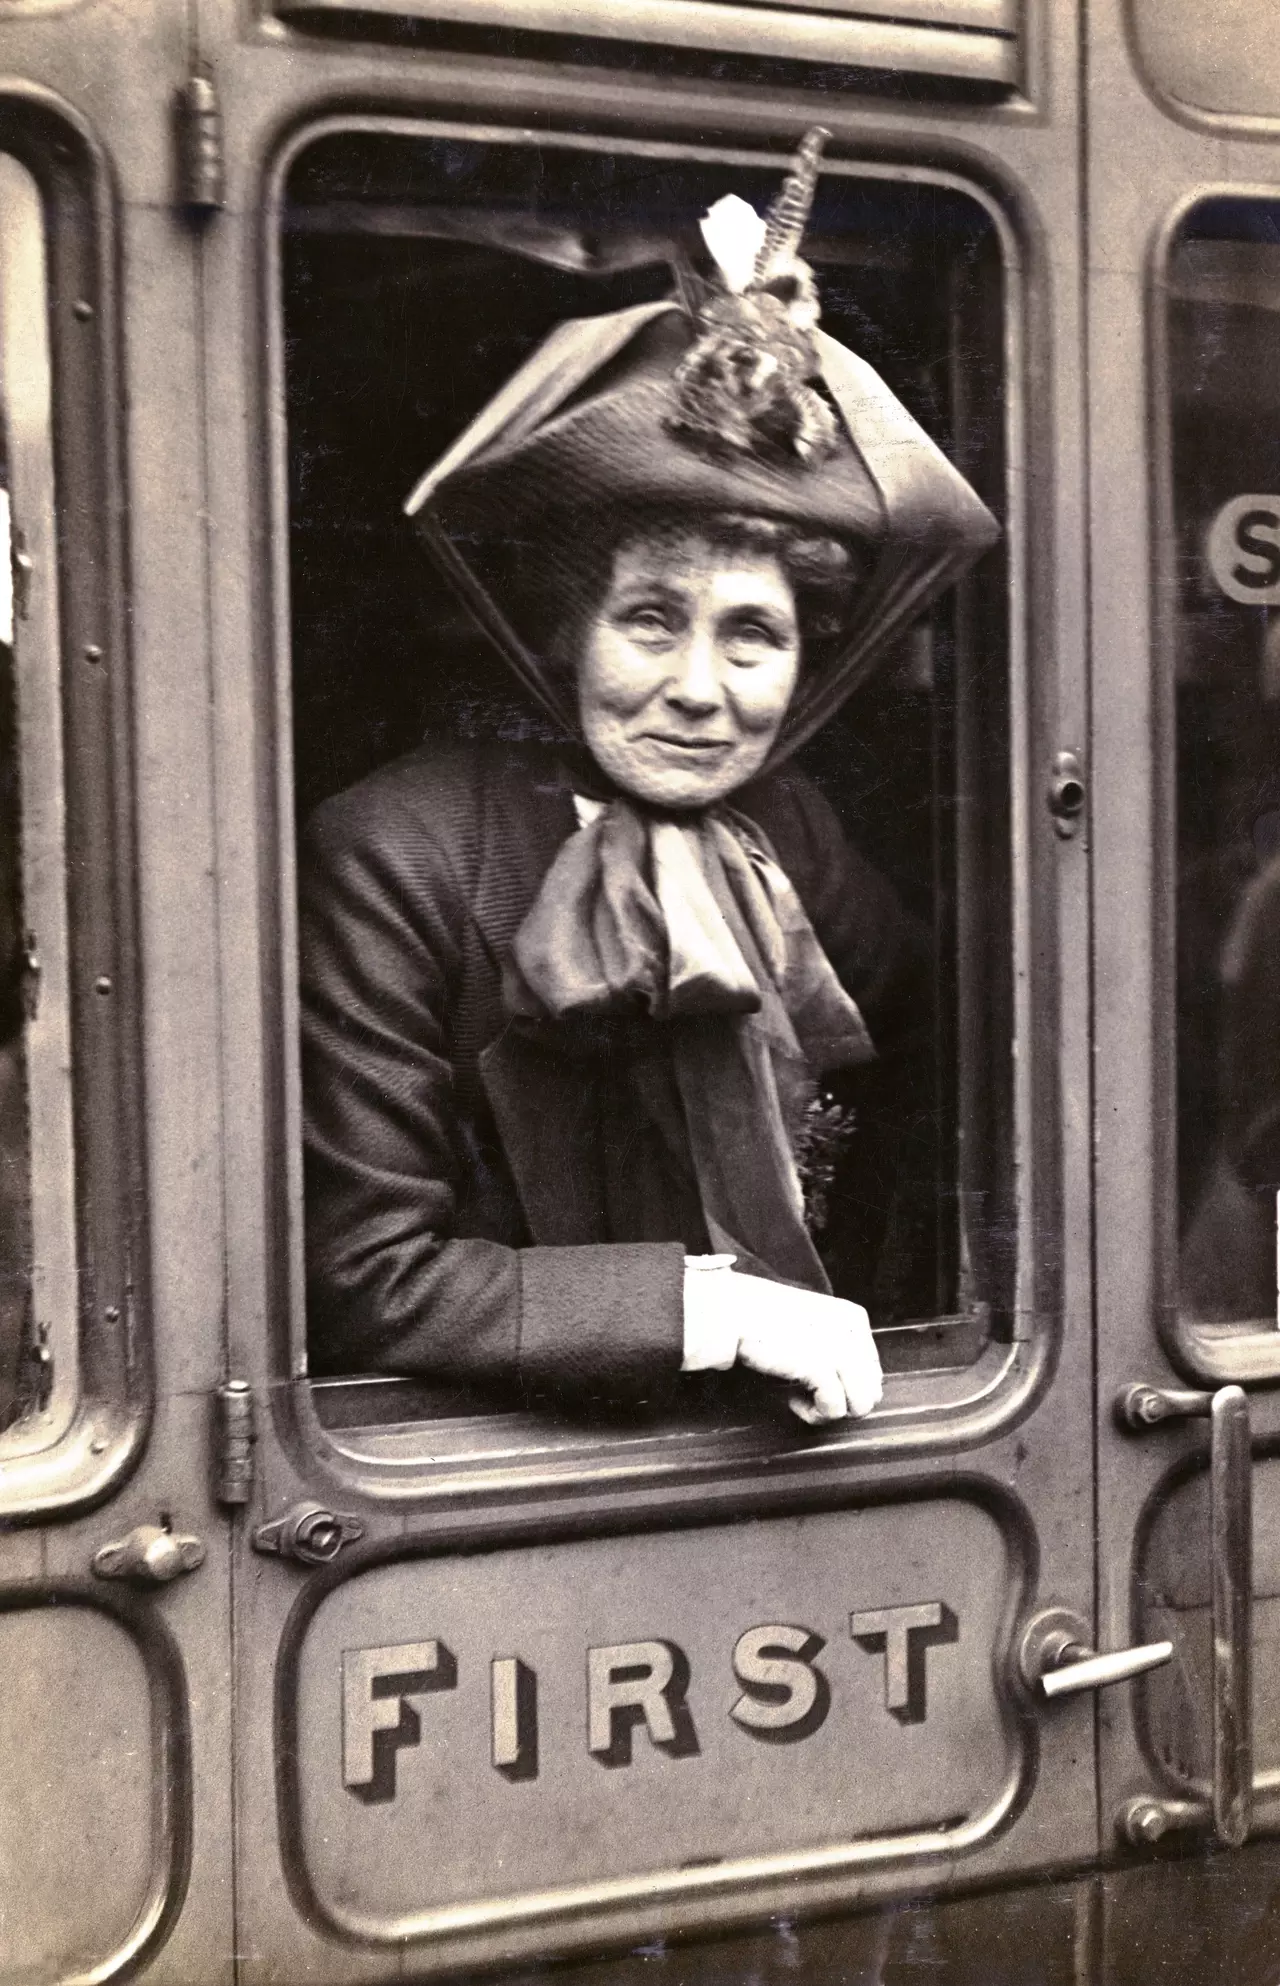 Emmeline travelled extensively, giving speeches and campaigning across Britain and in America, Canada and even Russia.